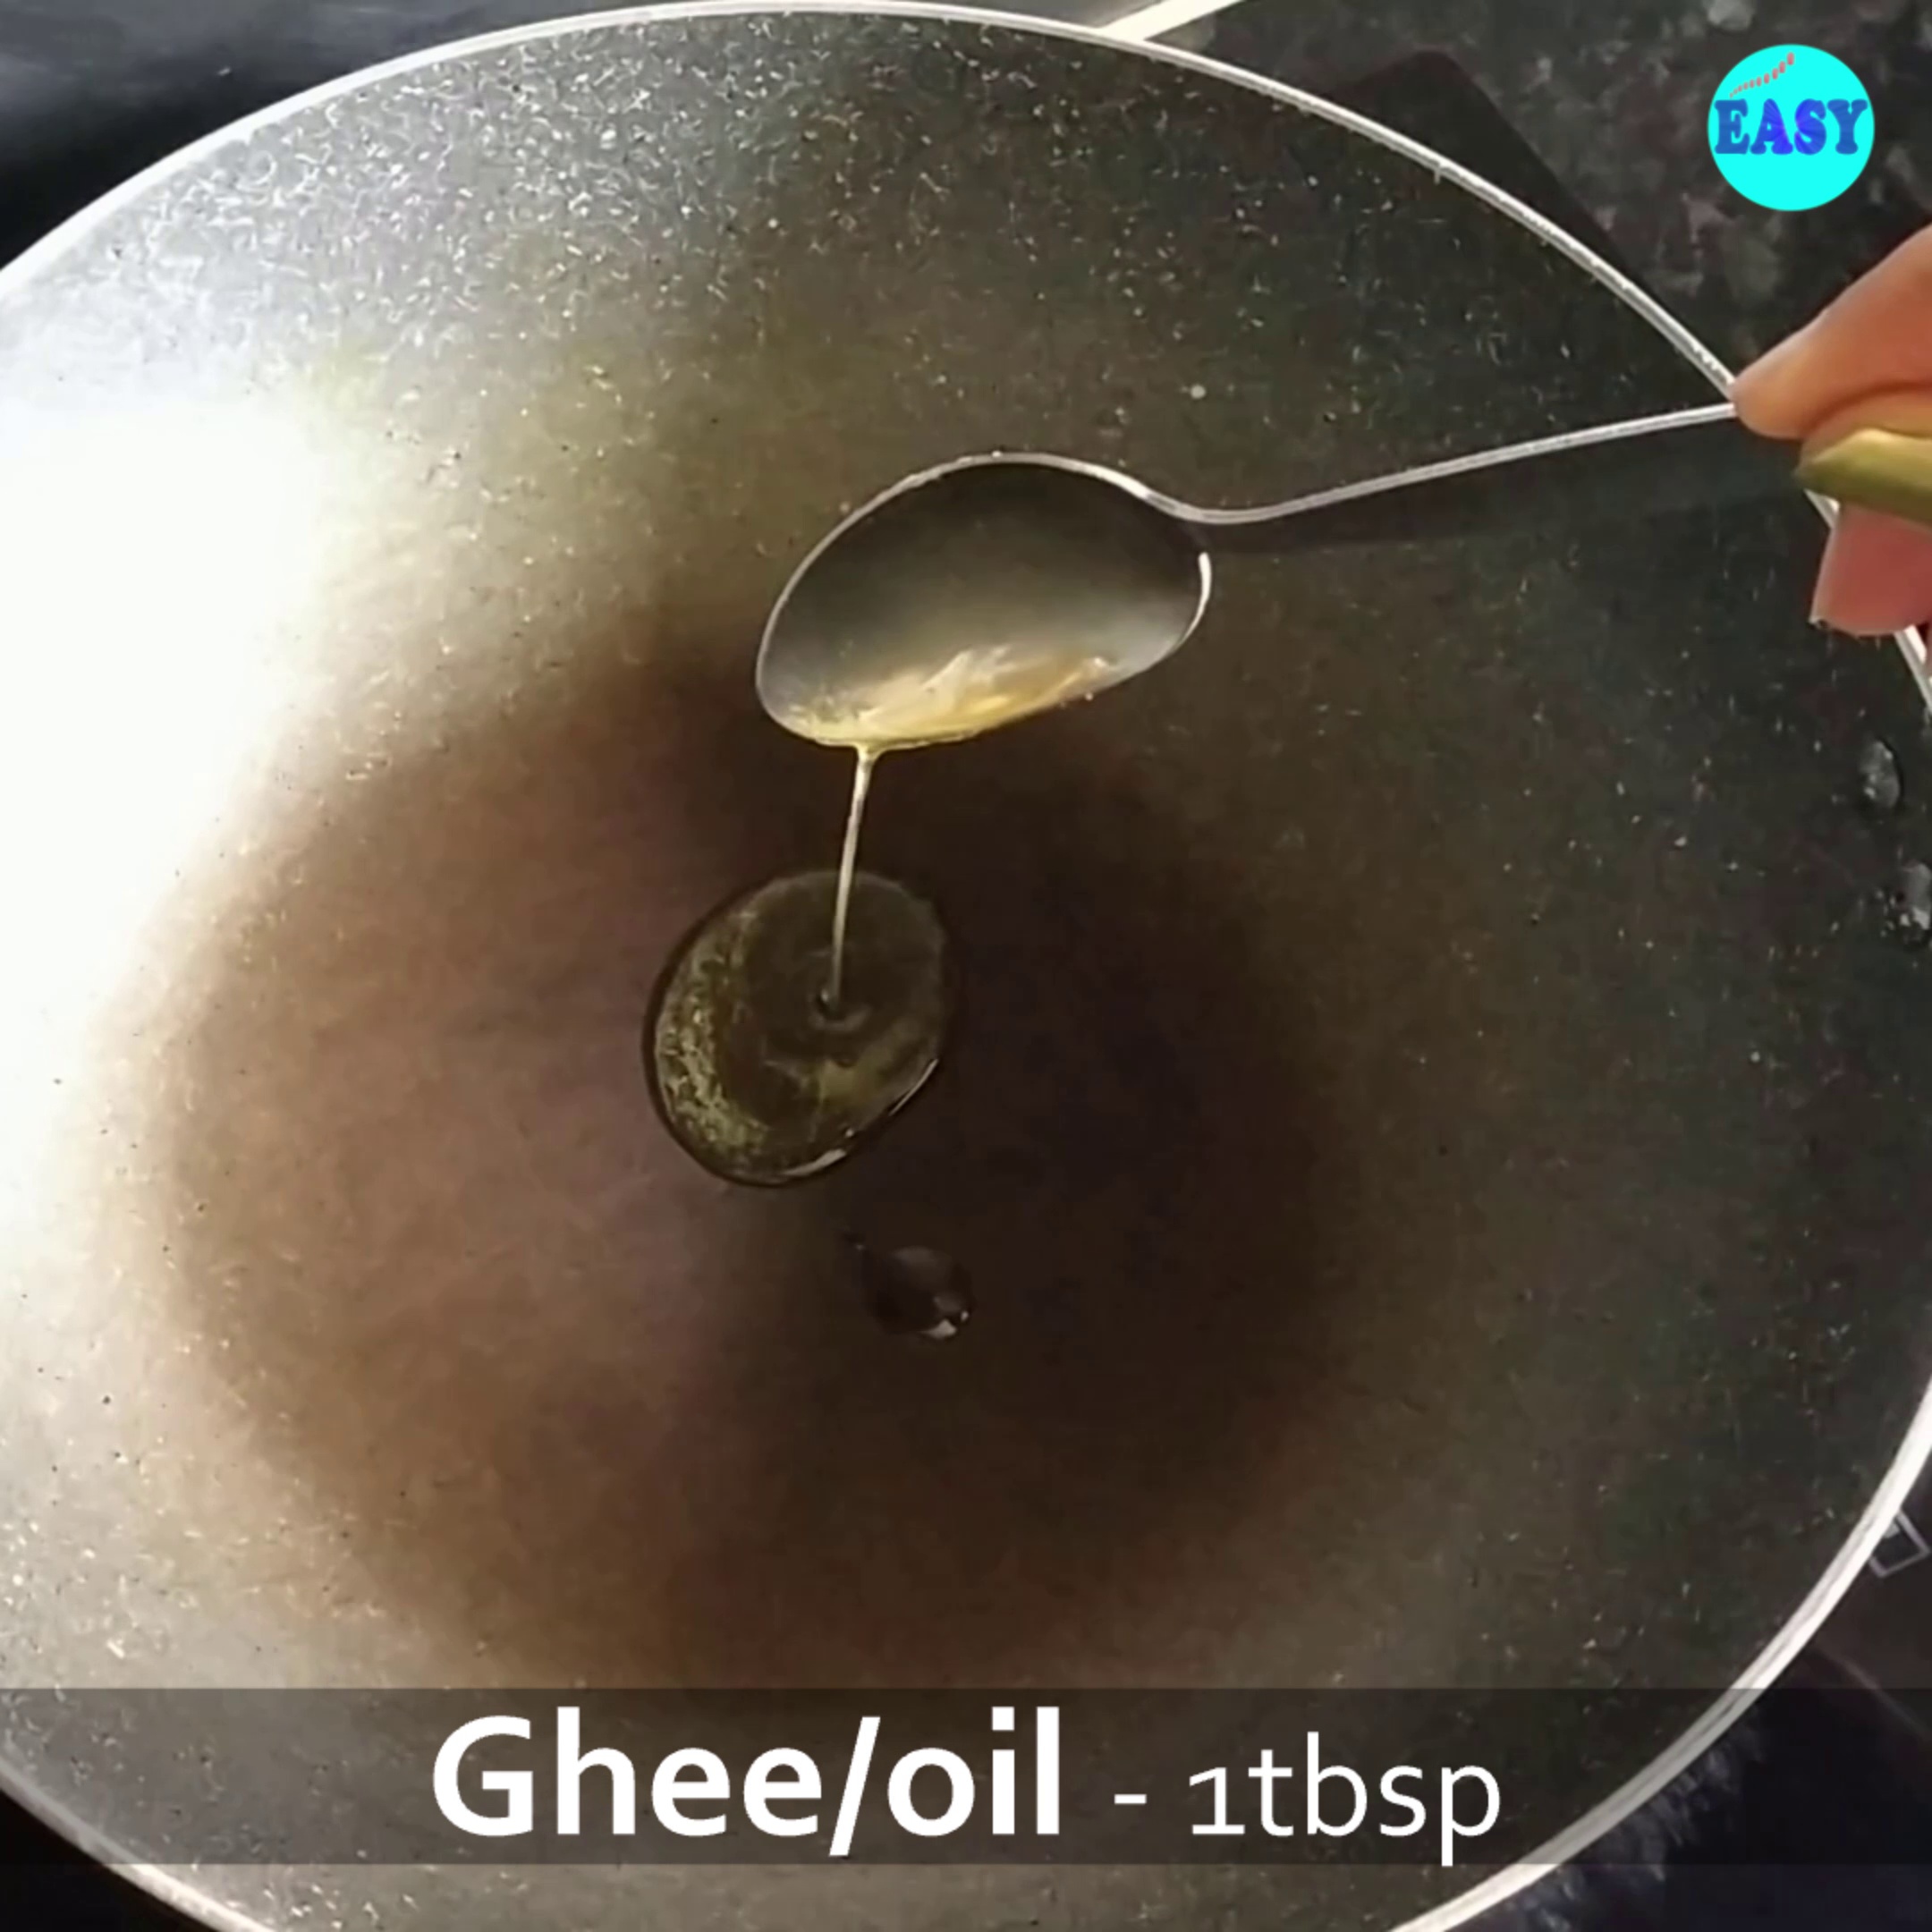 Step 3 - For tempering, heat oil or ghee in a pan.